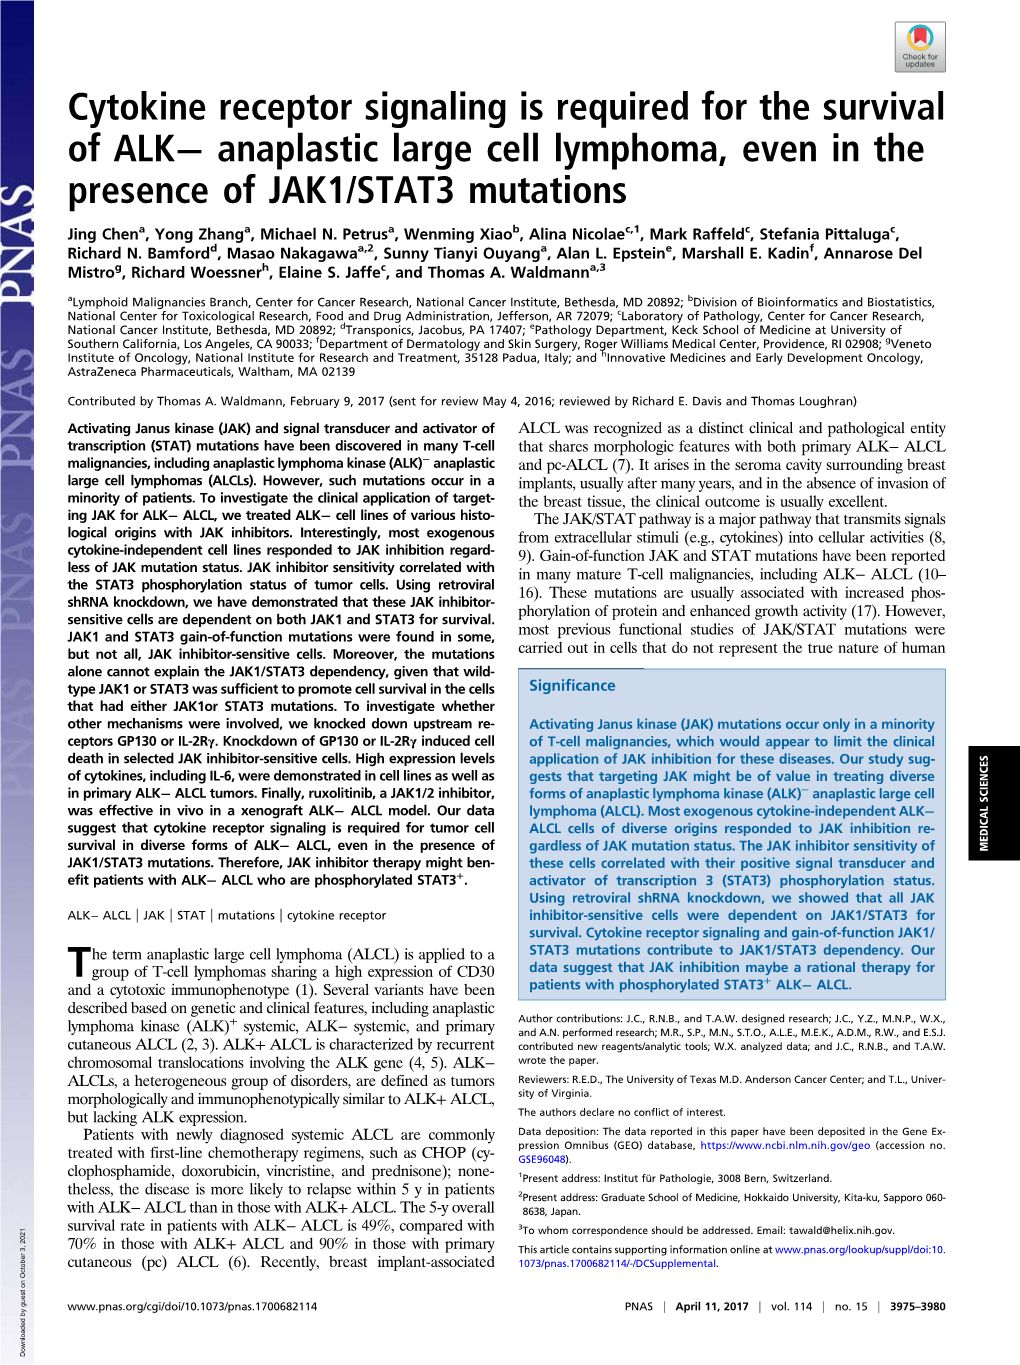 Anaplastic Large Cell Lymphoma, Even in the Presence of JAK1/STAT3 Mutations